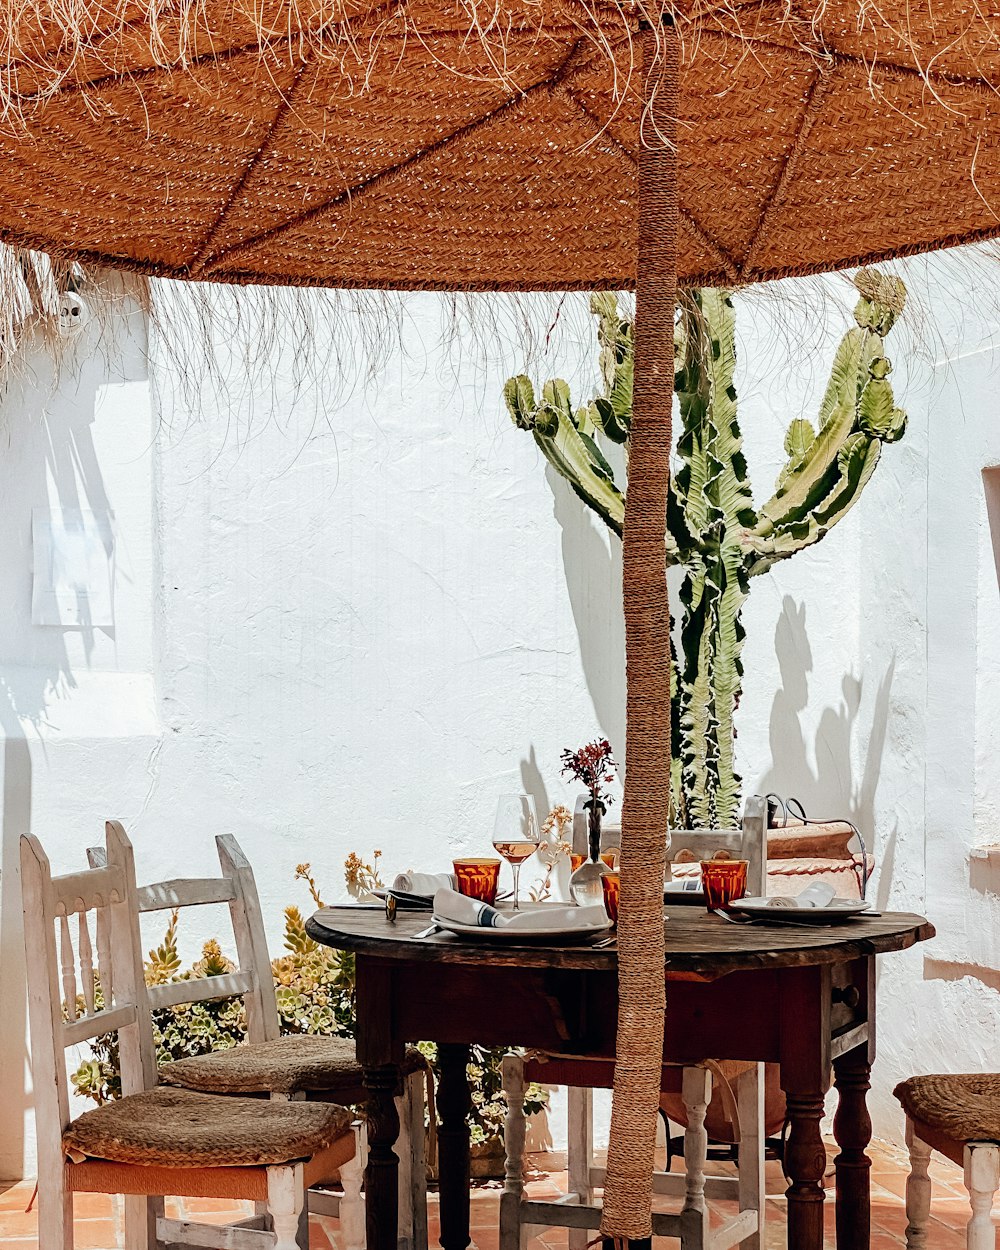 a table and chairs under an umbrella with a cactus in the background